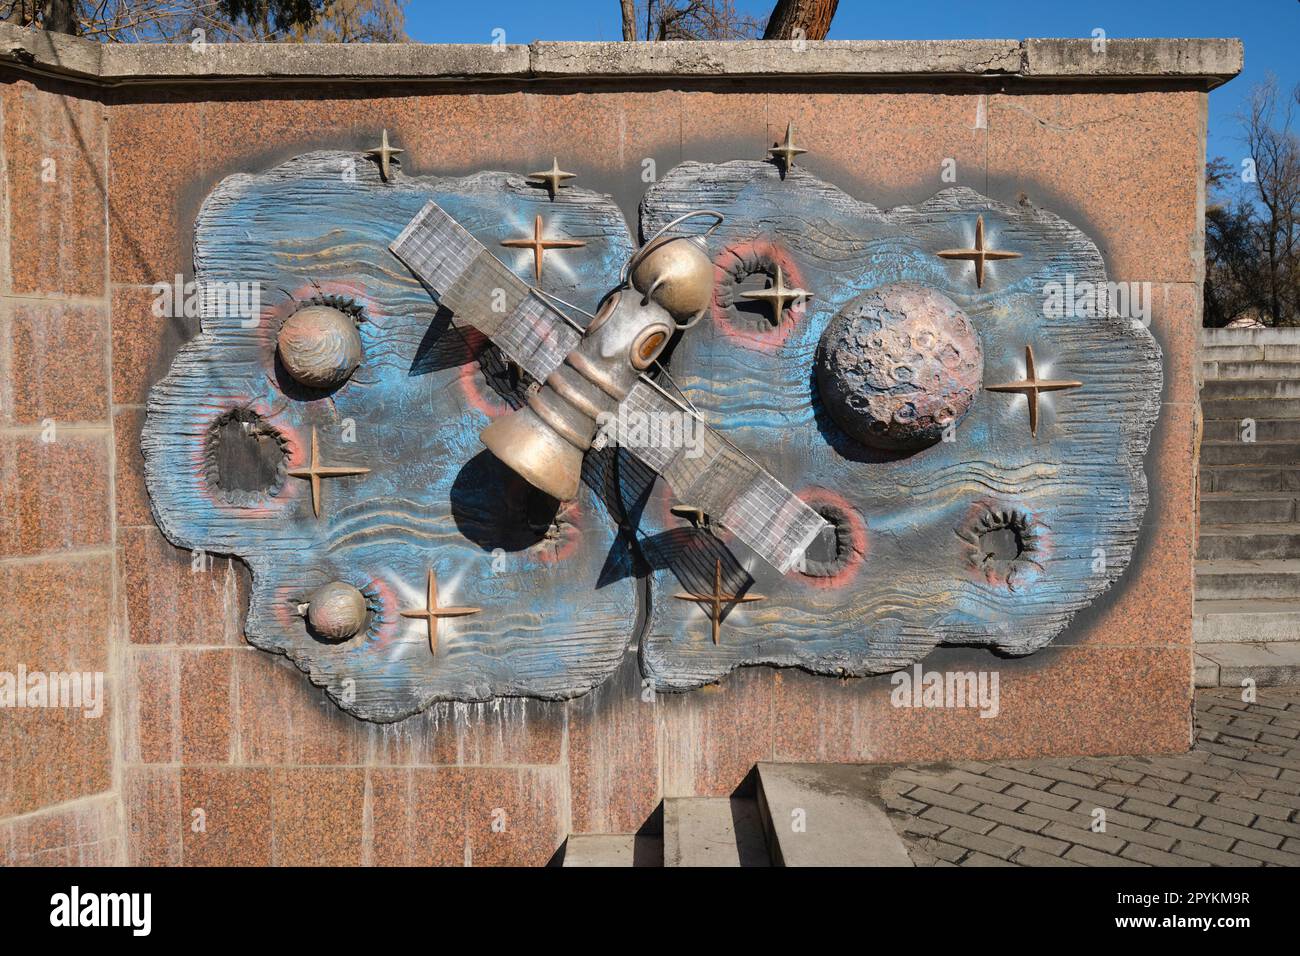 A frieze sculpture of the Soviet era space capsule Soyuz. On an exterior wall at the front entrance of the Toshkent Planetarium, Planetariy in Tashken Stock Photo